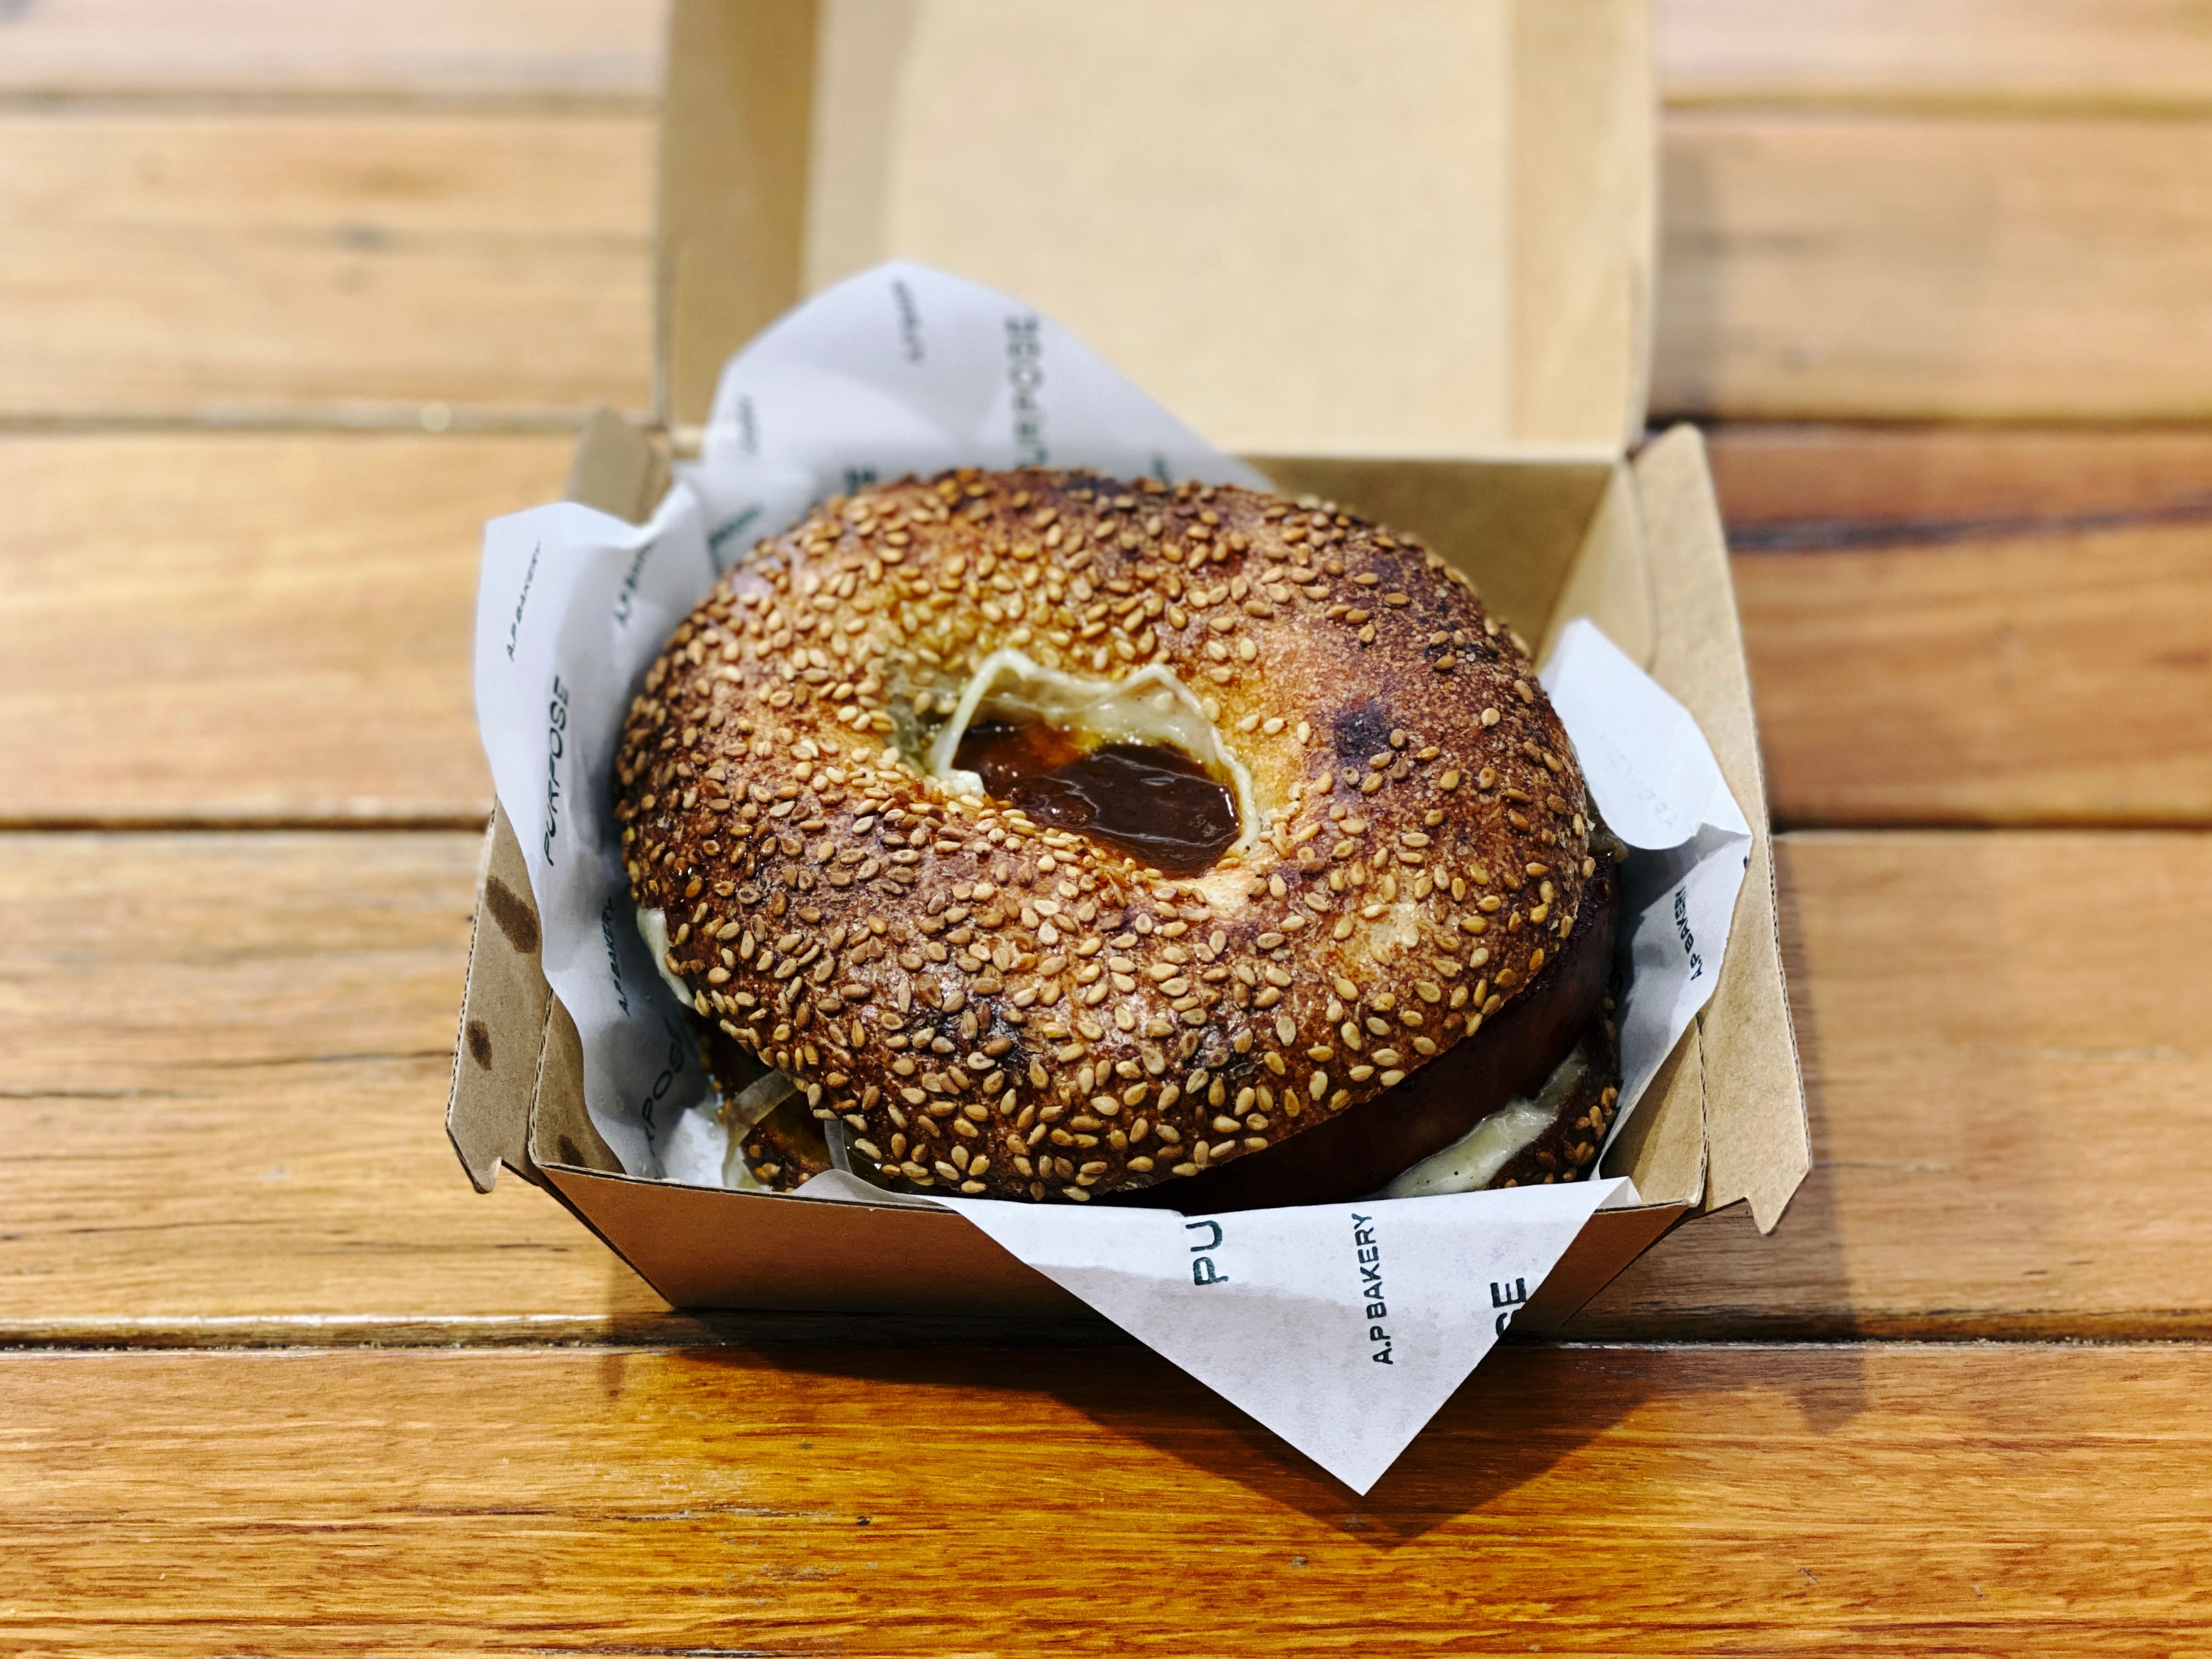 A photo of a sesame bagel sitting in a cardboard takeaway container with some cheese and sauce visible through the hole. It's hard to see in the photo but the piece of chorizo was nearly as large as the bagel and probably would have been close to a centimetre thick.